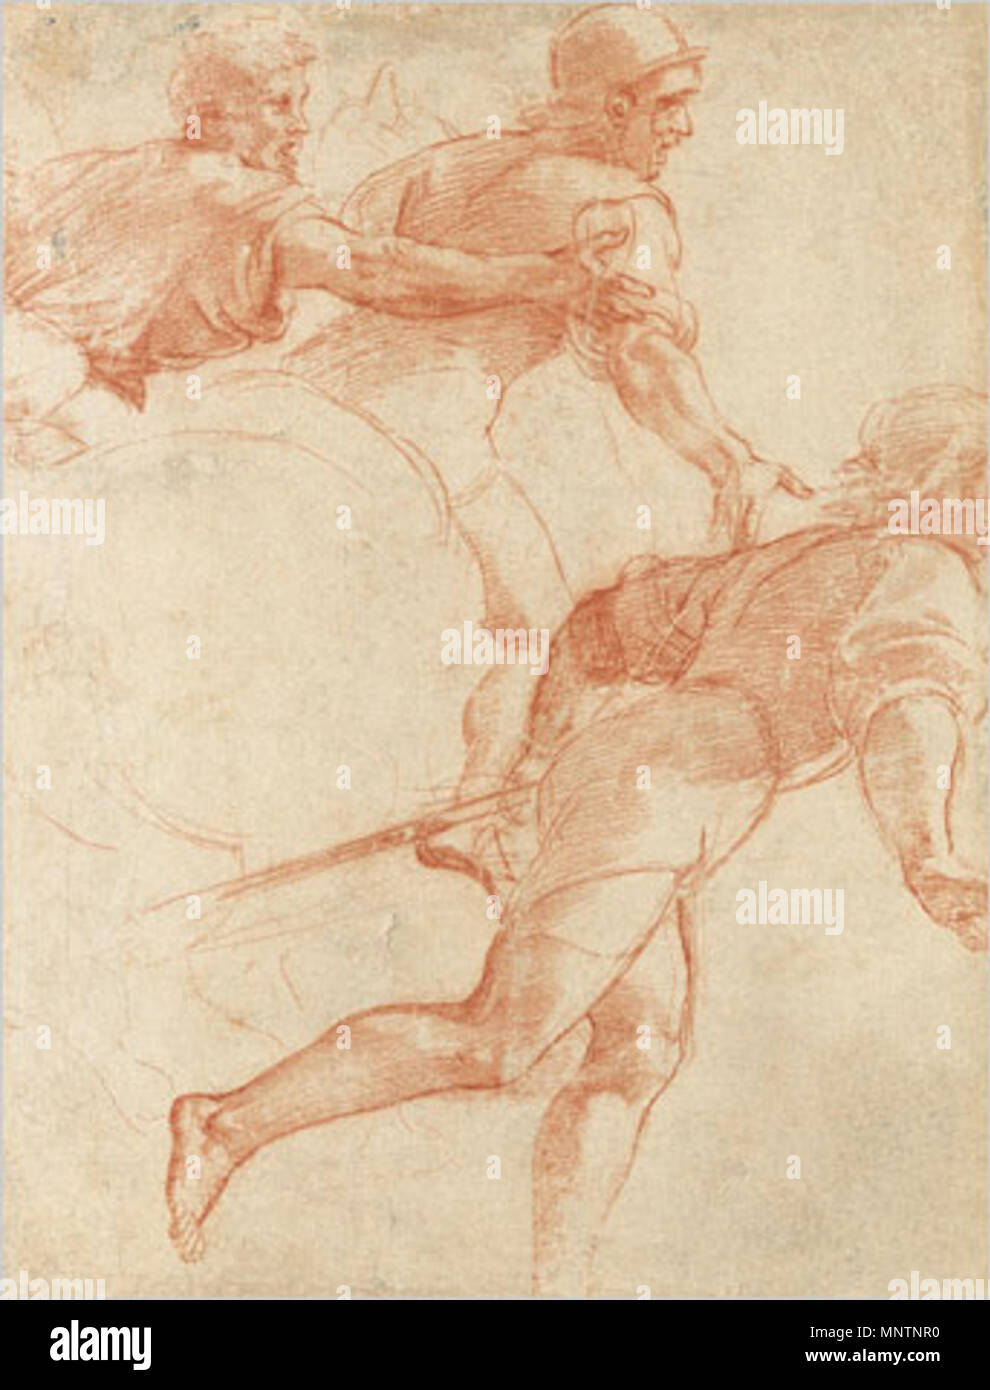 . Study of soldiers for Conversion of Saul. circa 1615-16.    Raphael  (1483–1520)       Alternative names Raffaello Santi, Raffaello de Urbino, Rafael Sanzio de Urbino, Raffael  Description painter and architect  Date of birth/death 6 April 1483 6 April 1520  Location of birth/death Urbino Rome  Work location Florence, Rome, Perugia  Authority control  : Q5597 VIAF: 64055977 ISNI: 0000 0001 2136 483X ULAN: 500023578 LCCN: n79041756 NLA: 35442294 WorldCat 1042 Raphael - Study of Soldiers Stock Photo